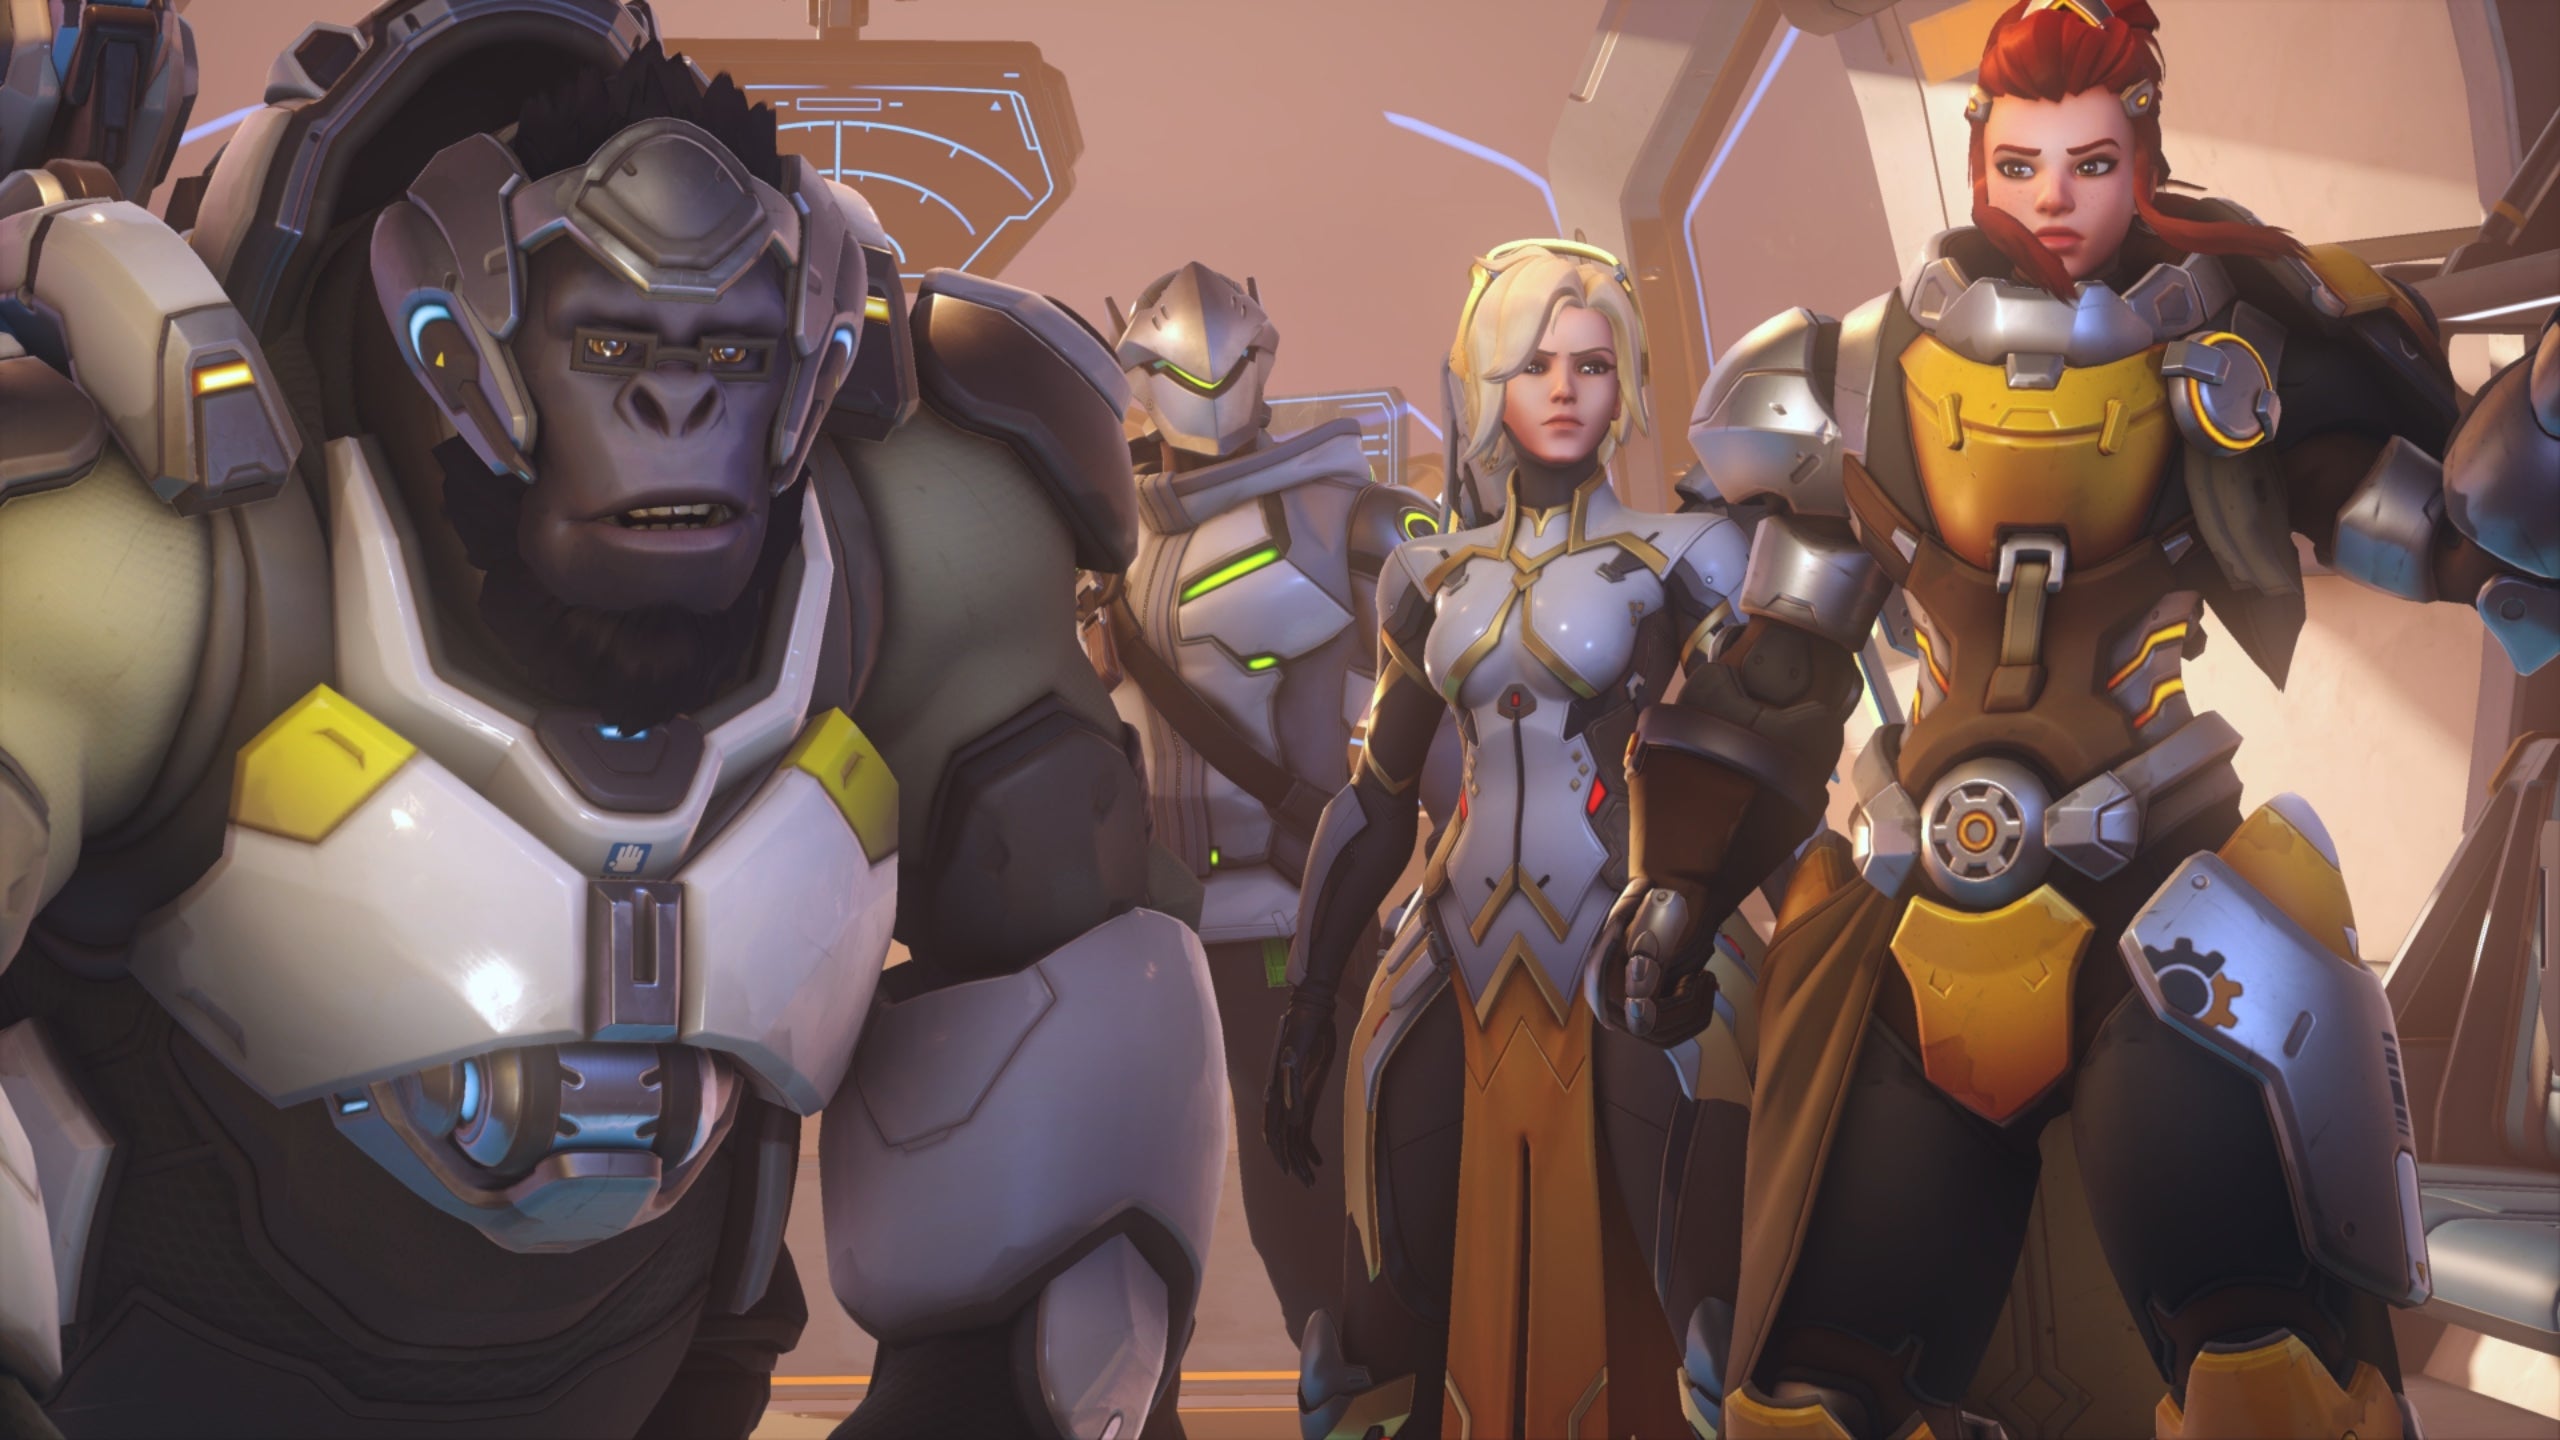 OG Overwatch 2 players are finding their characters locked absent in annoying character pick bug